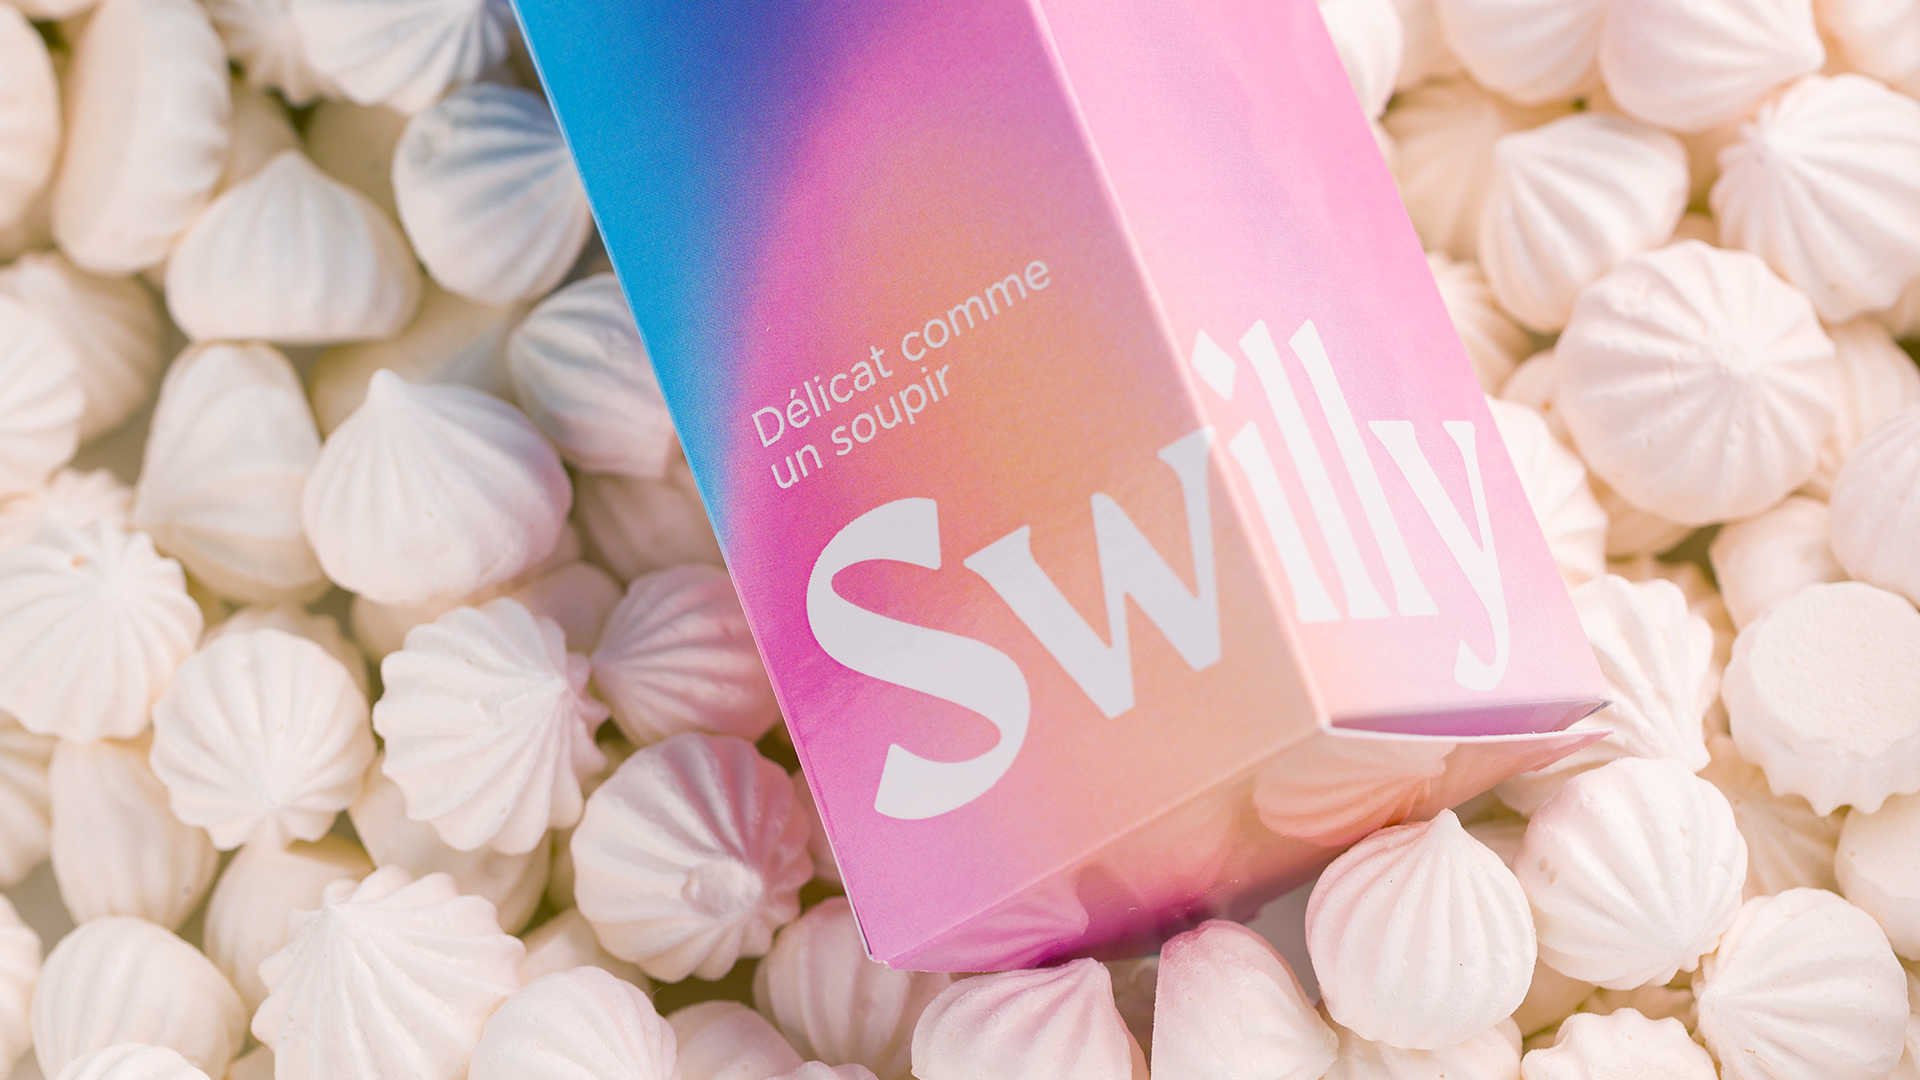 Swilly by Belchior Perfume Packaging Concept by Juliana Cappelatti